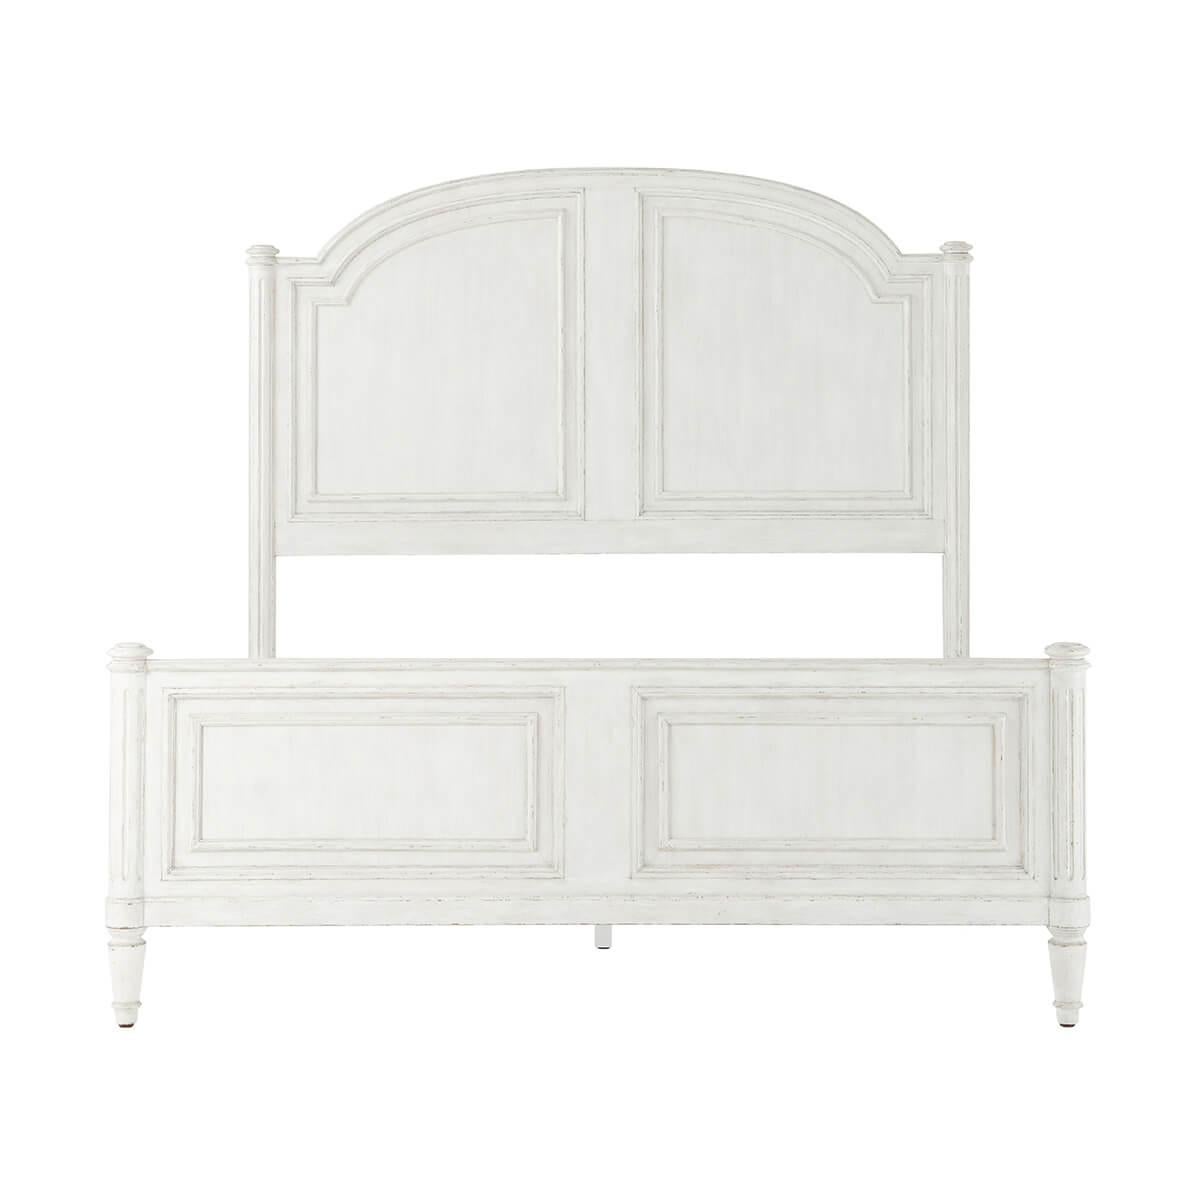 Vietnamese Rustic Painted Four Post Queen Bed For Sale